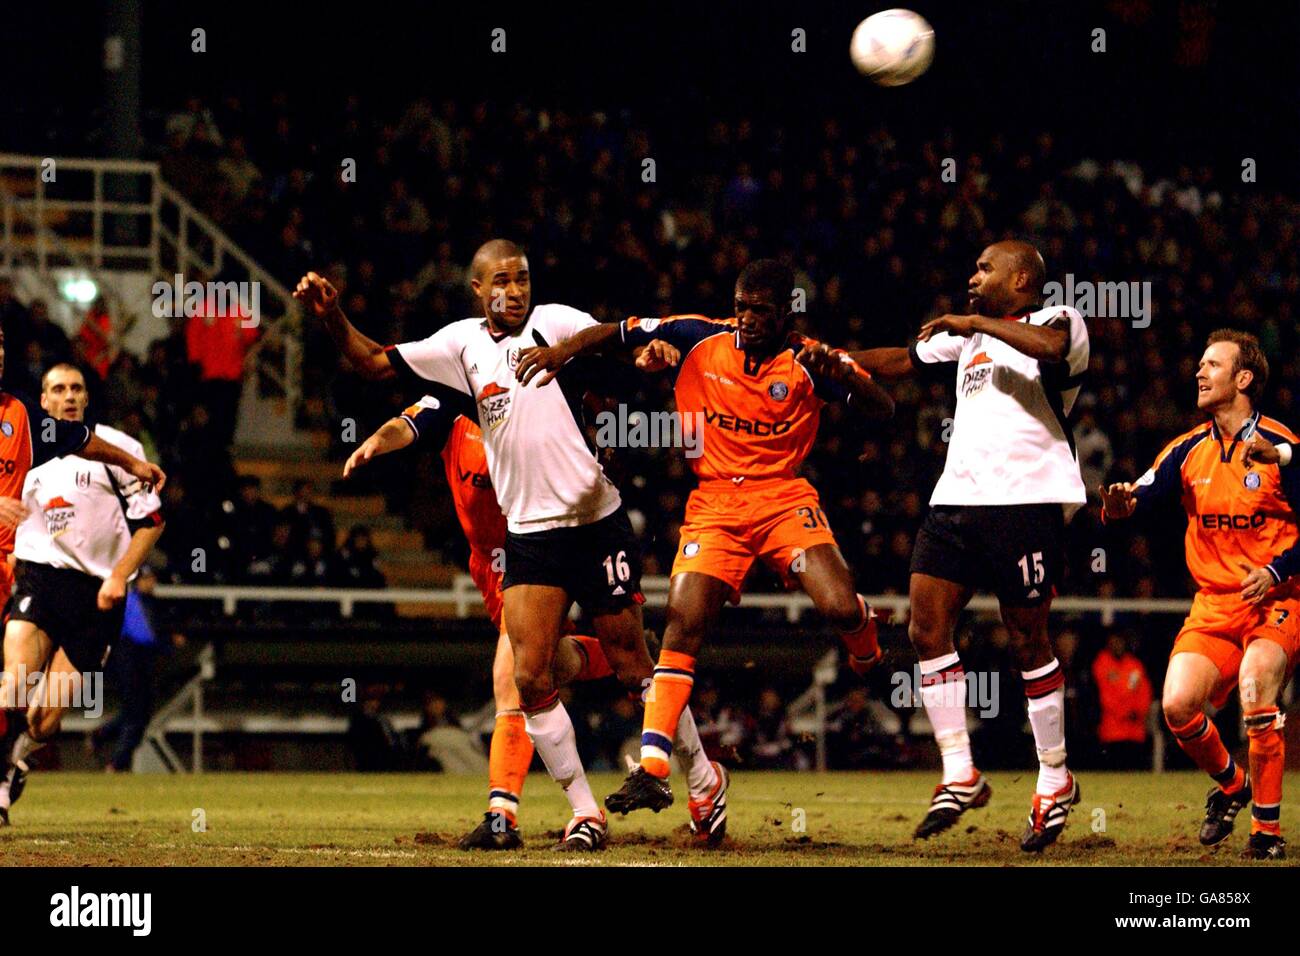 Soccer - AXA FA Cup - Third Round Replay - Fulham v Wycombe Wanderers. Wycombe Wanderers' Steve Brown gets between Fulham's Zat Knight and Barry Hayles Stock Photo